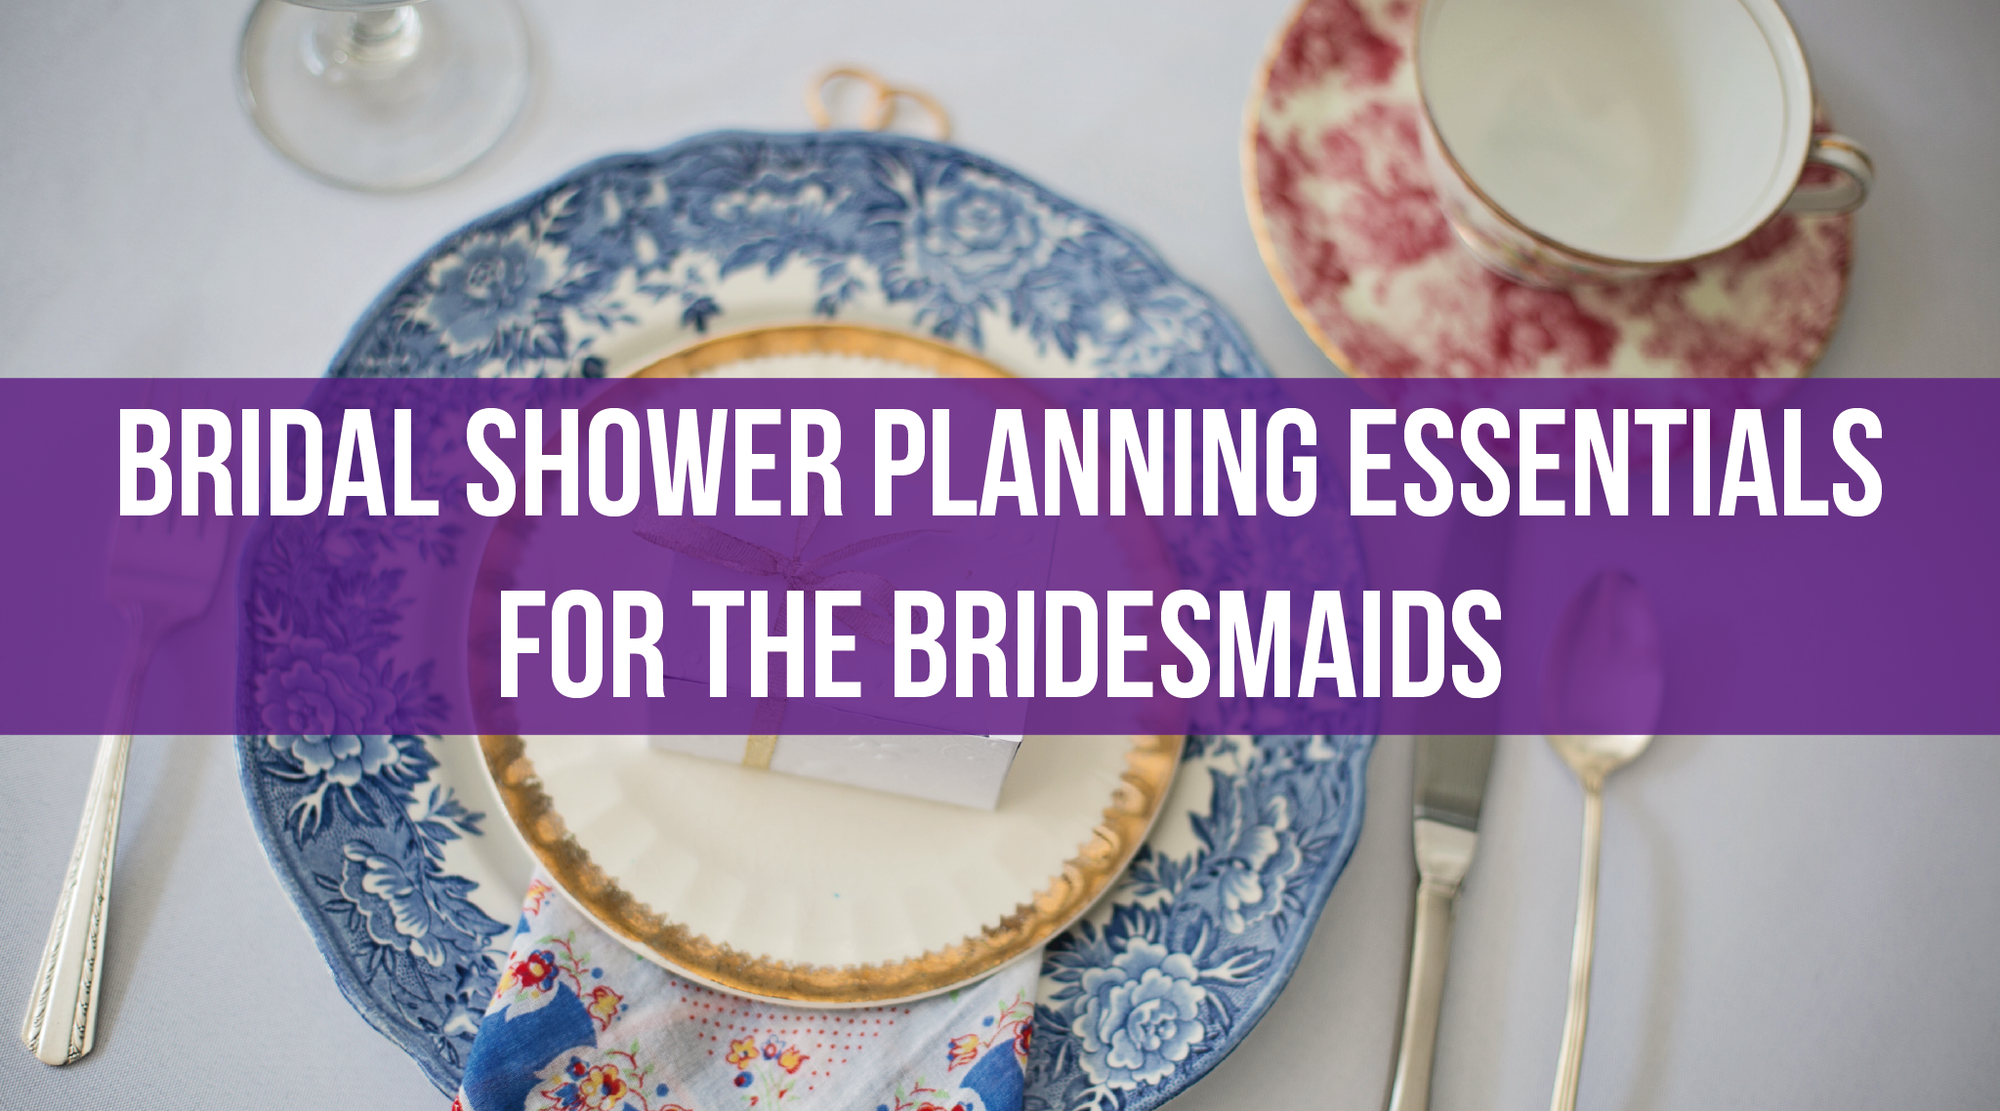 Bridal Shower Planning Essentials for the Bridesmaids